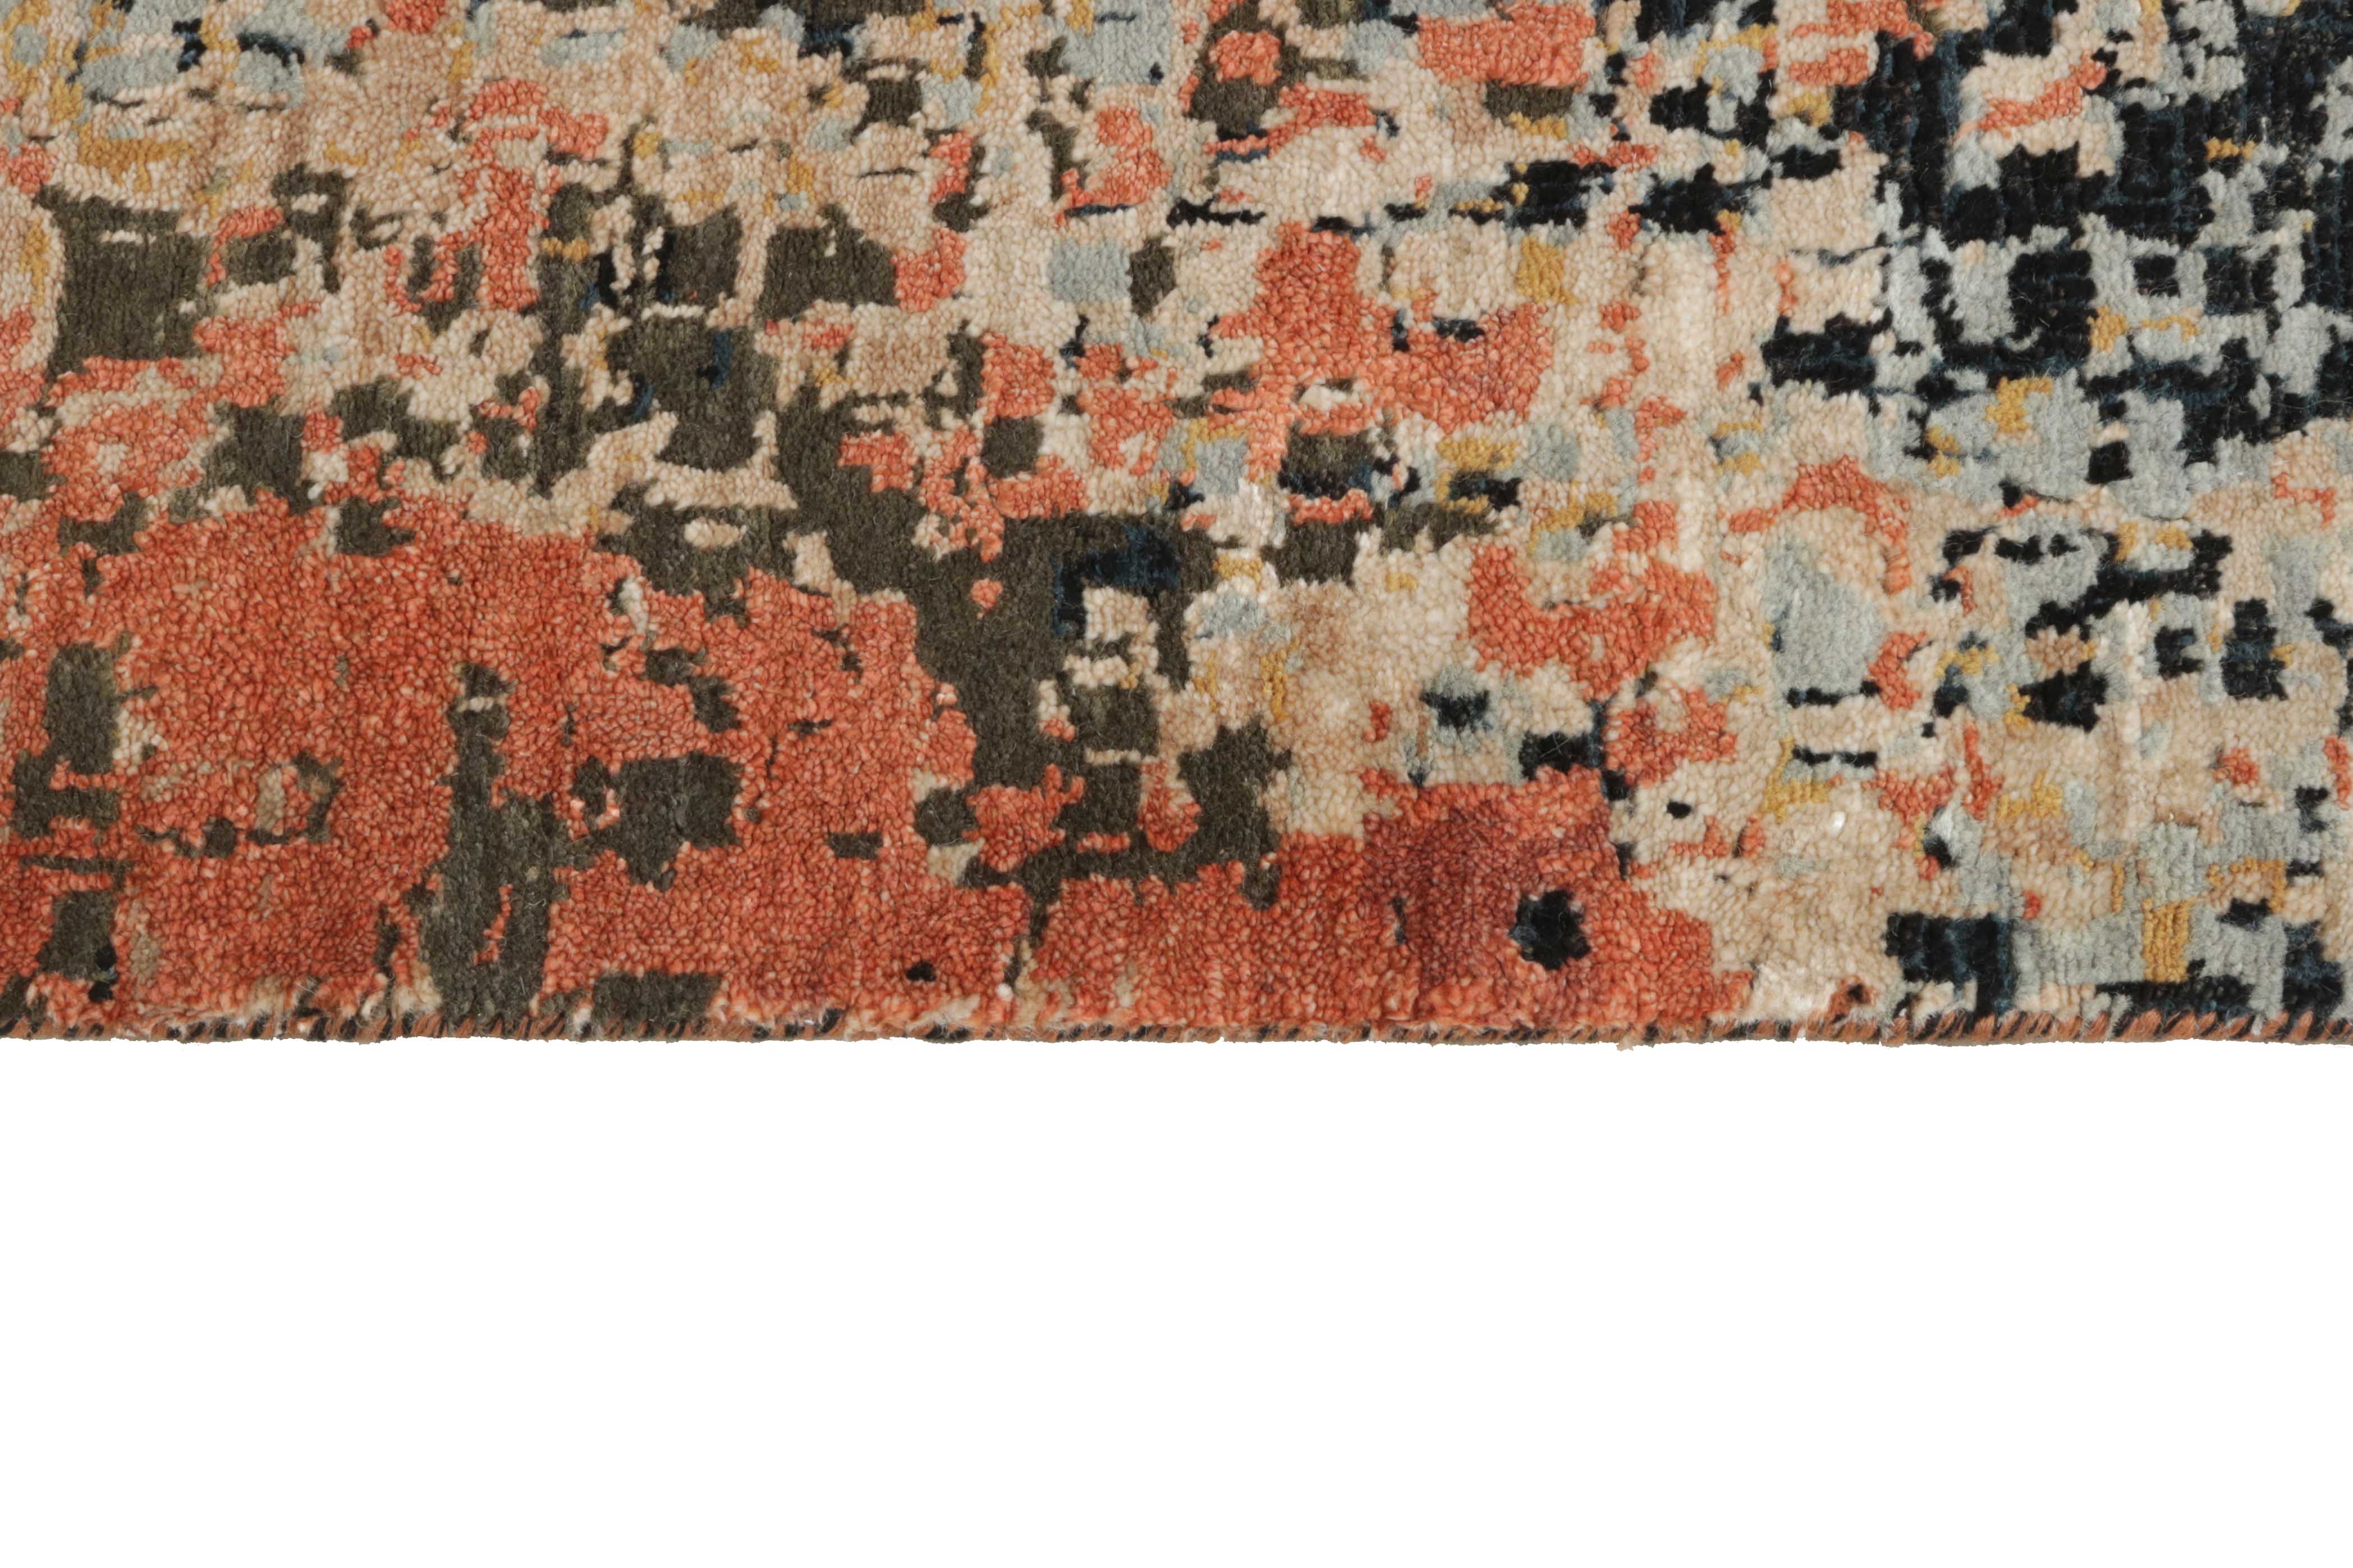 Large coral abstract rug